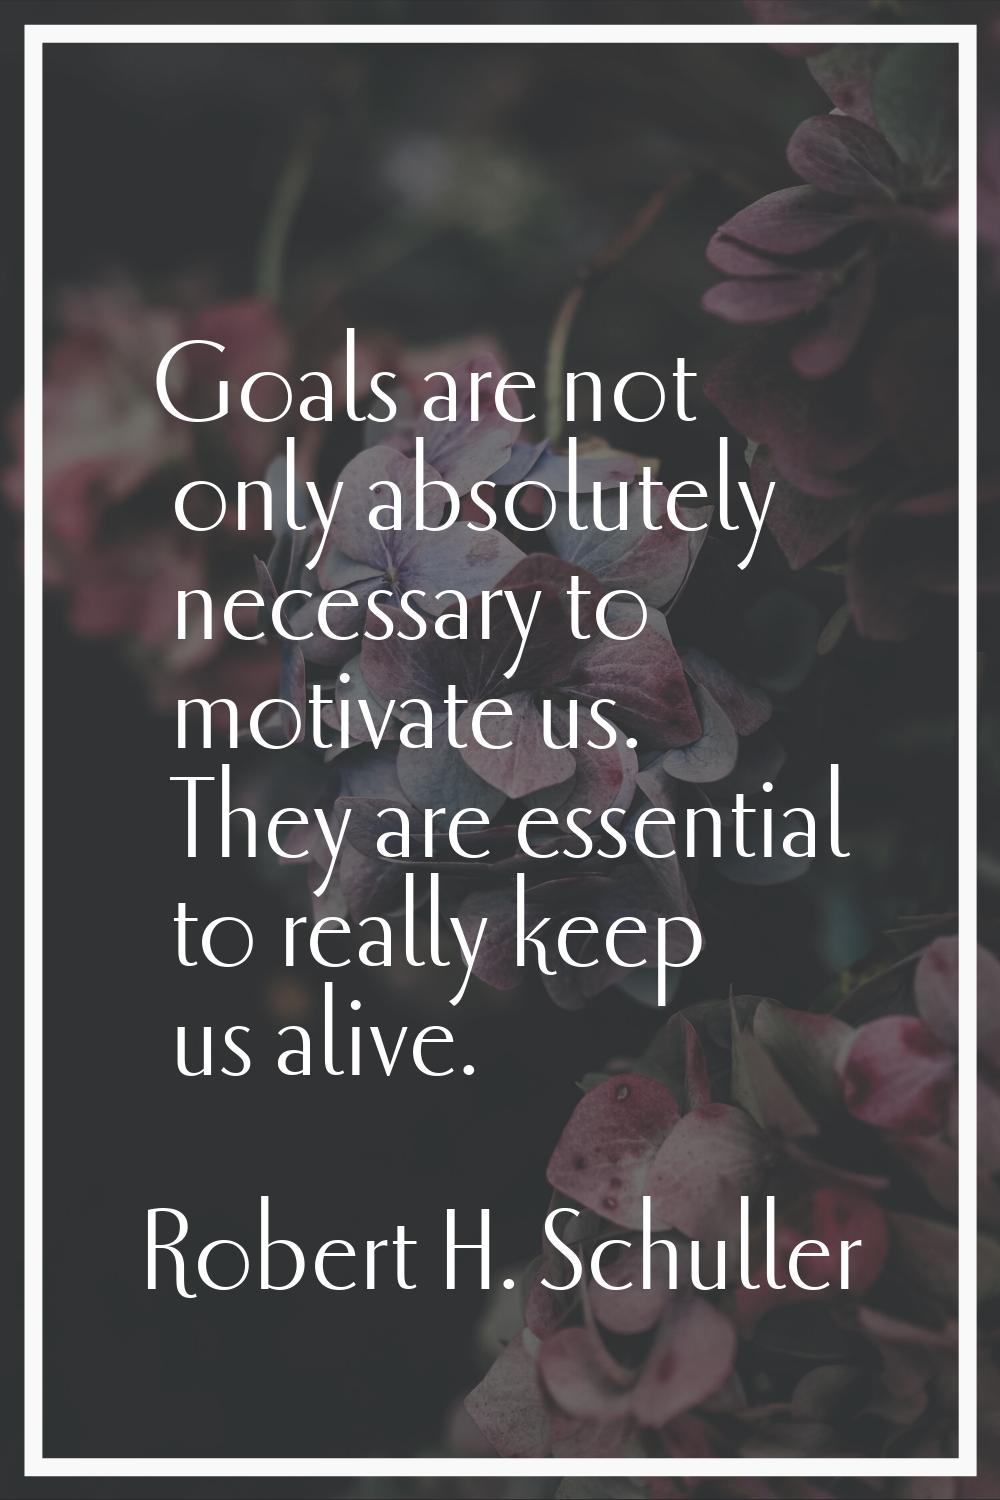 Goals are not only absolutely necessary to motivate us. They are essential to really keep us alive.